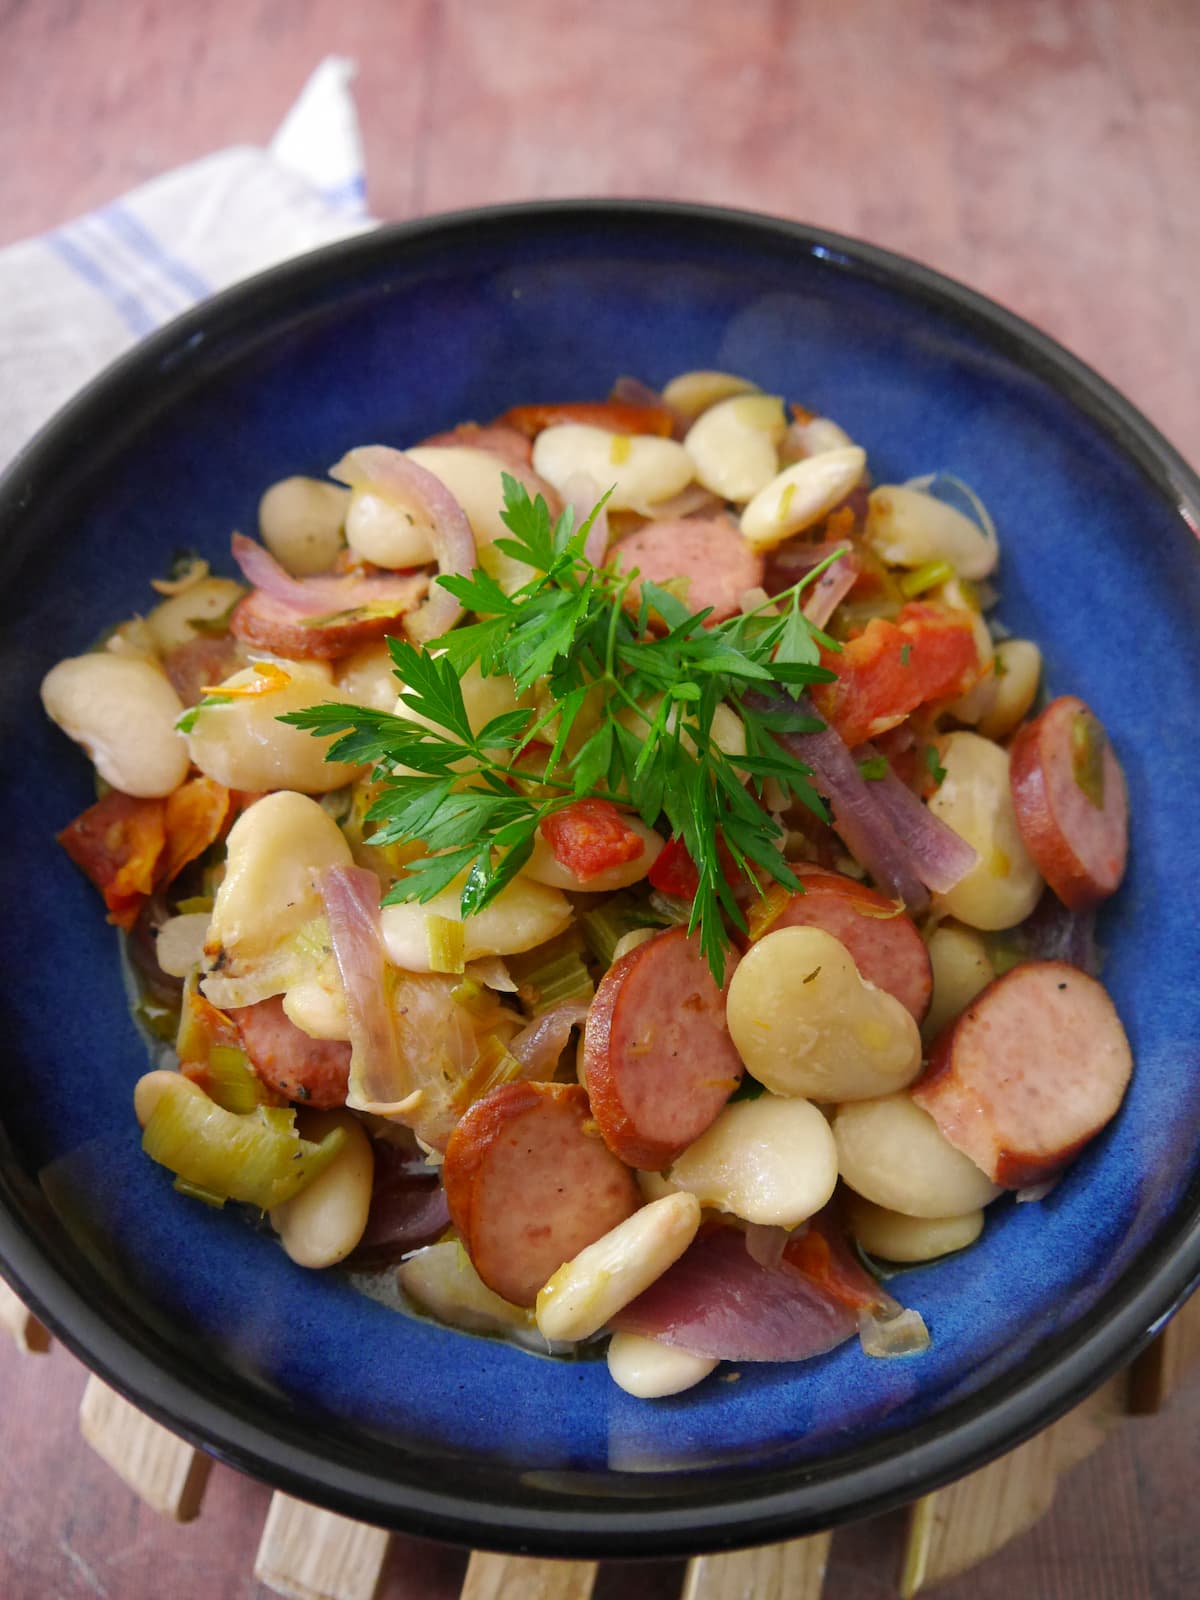 Blue bowl filled with butter bean and smoked sausage stew with a garnish of fresh parsley.